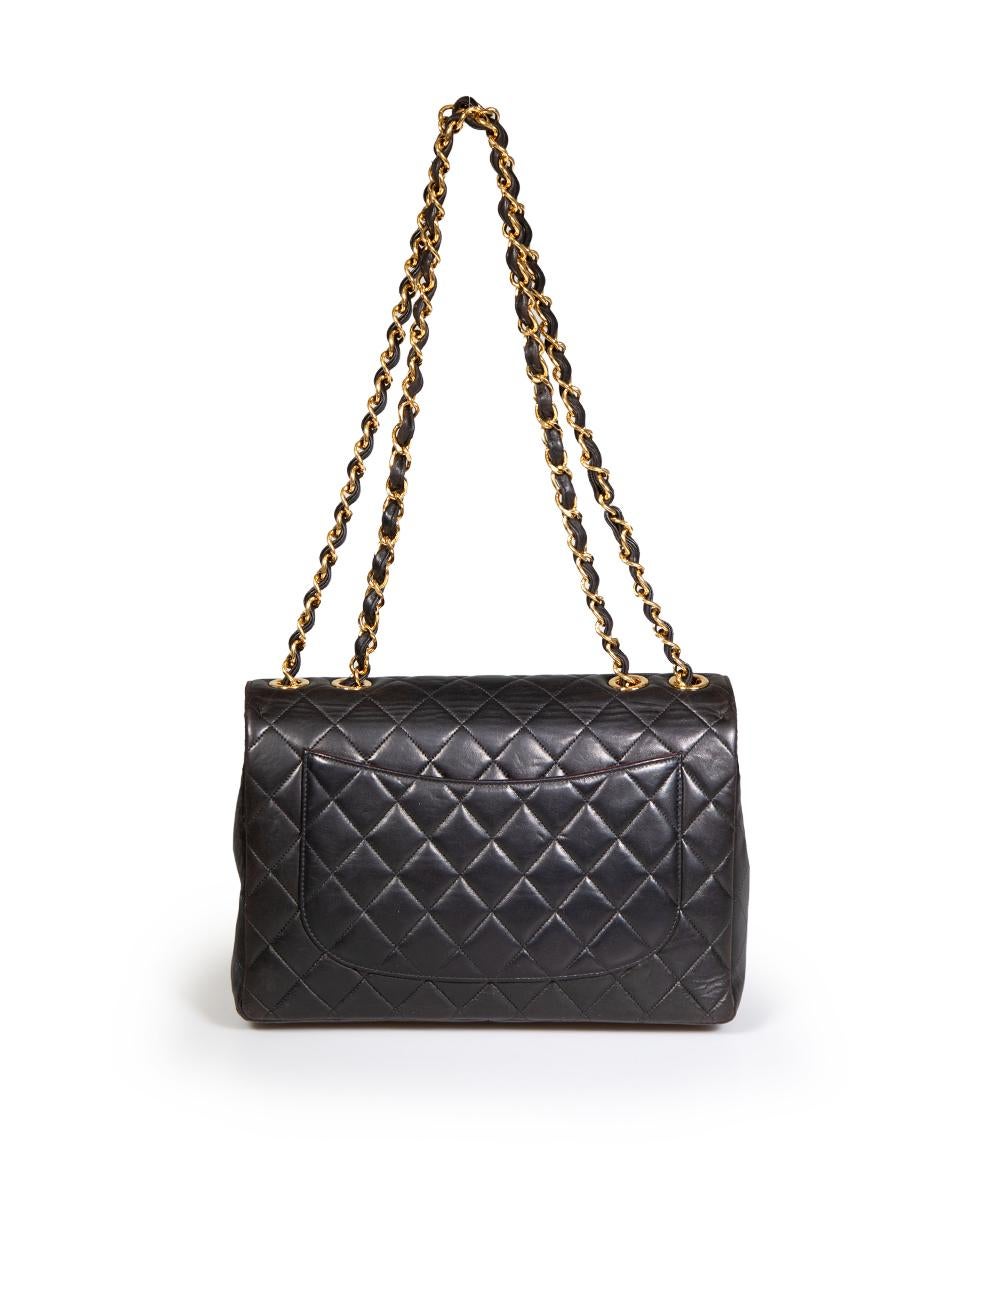 Chanel 1997-1999 Vintage Black Leather 24 Jumbo Classic Single Flap In Good Condition For Sale In London, GB